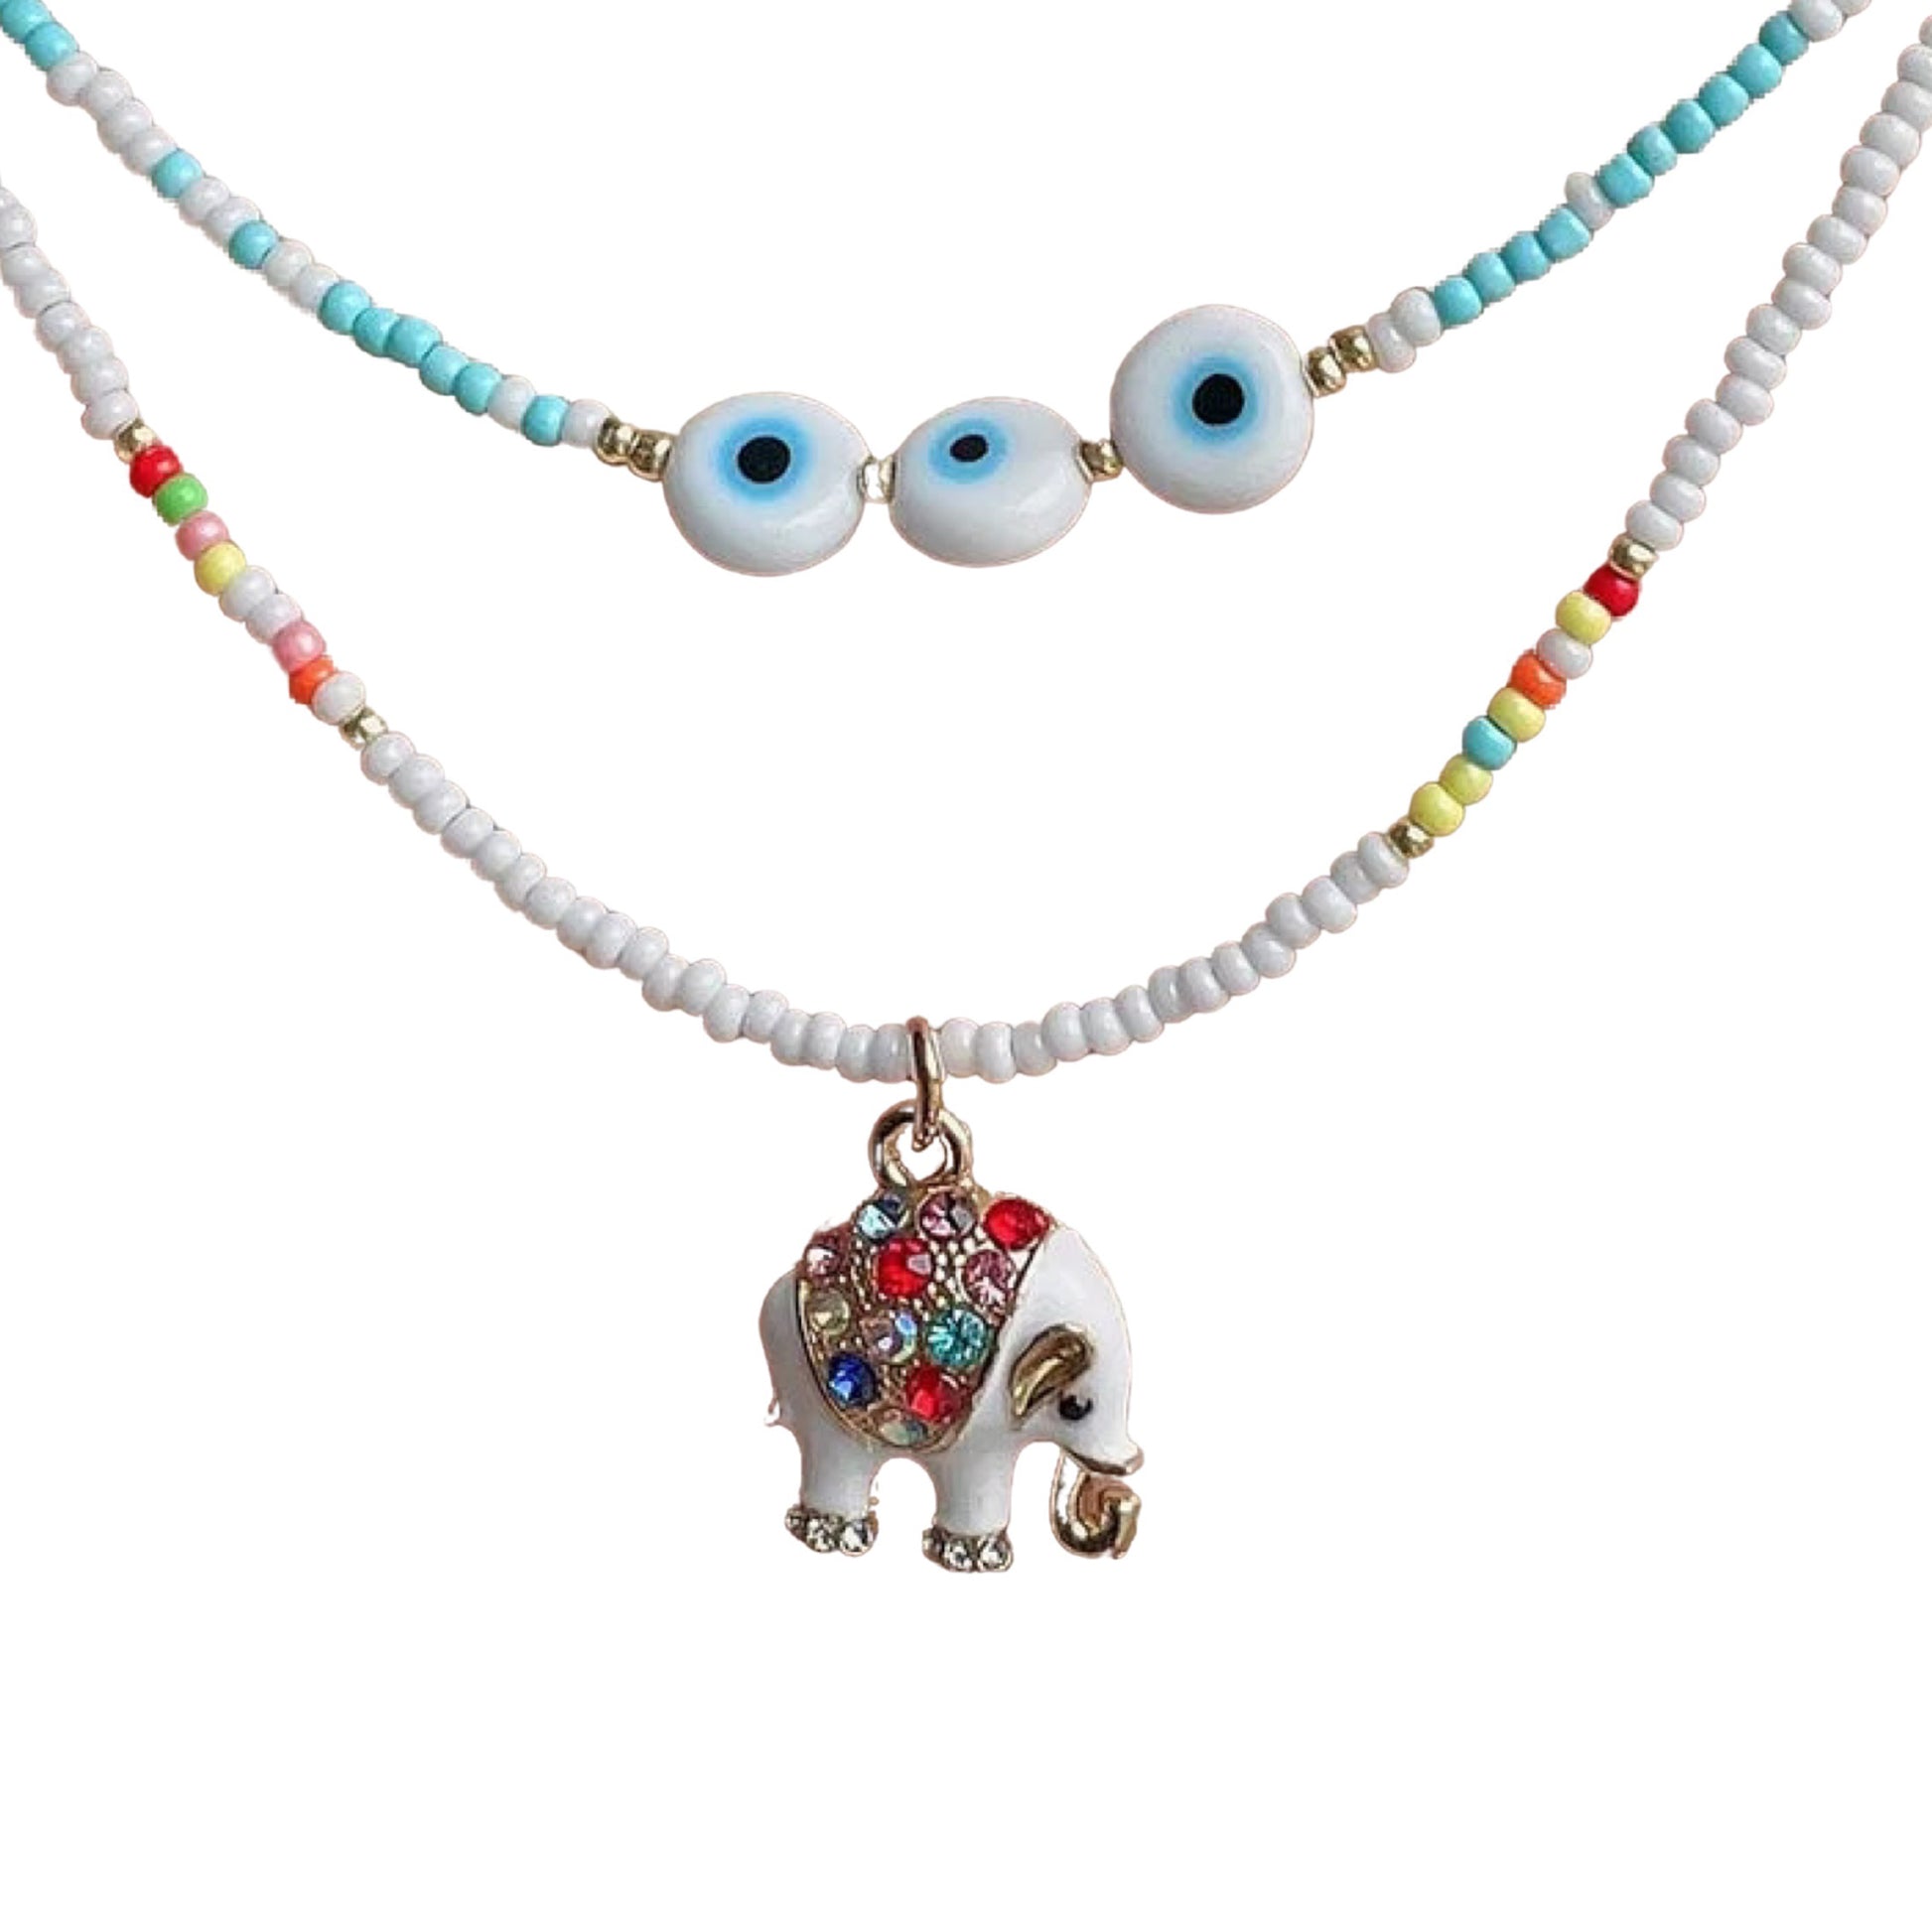 Ethnic Elephant and Evil Eye Beaded Necklace - PEACHY ACCESSORIES